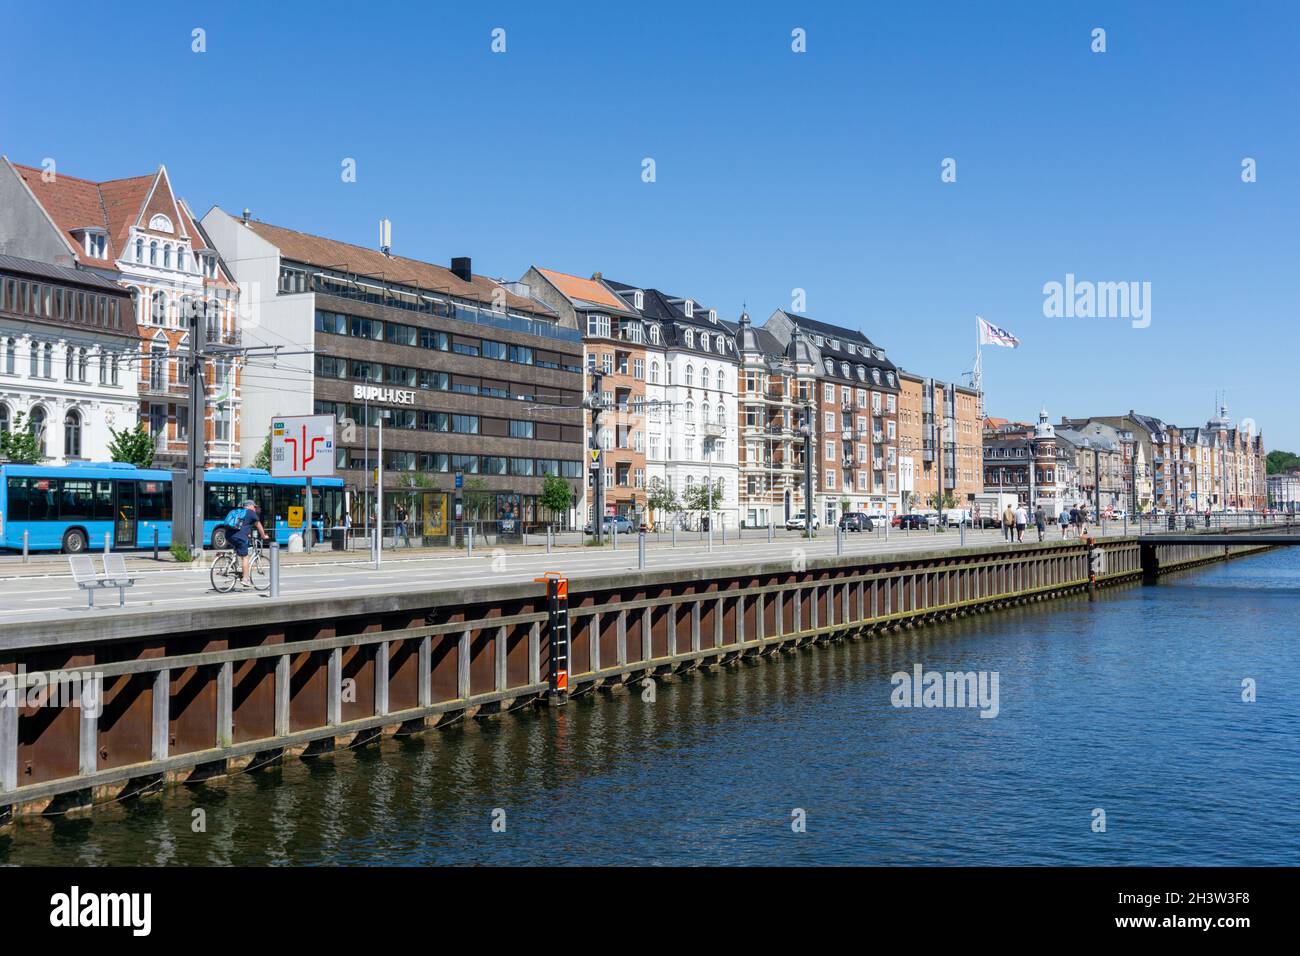 Aarhus Harbor High Resolution Stock Photography and Images - Alamy